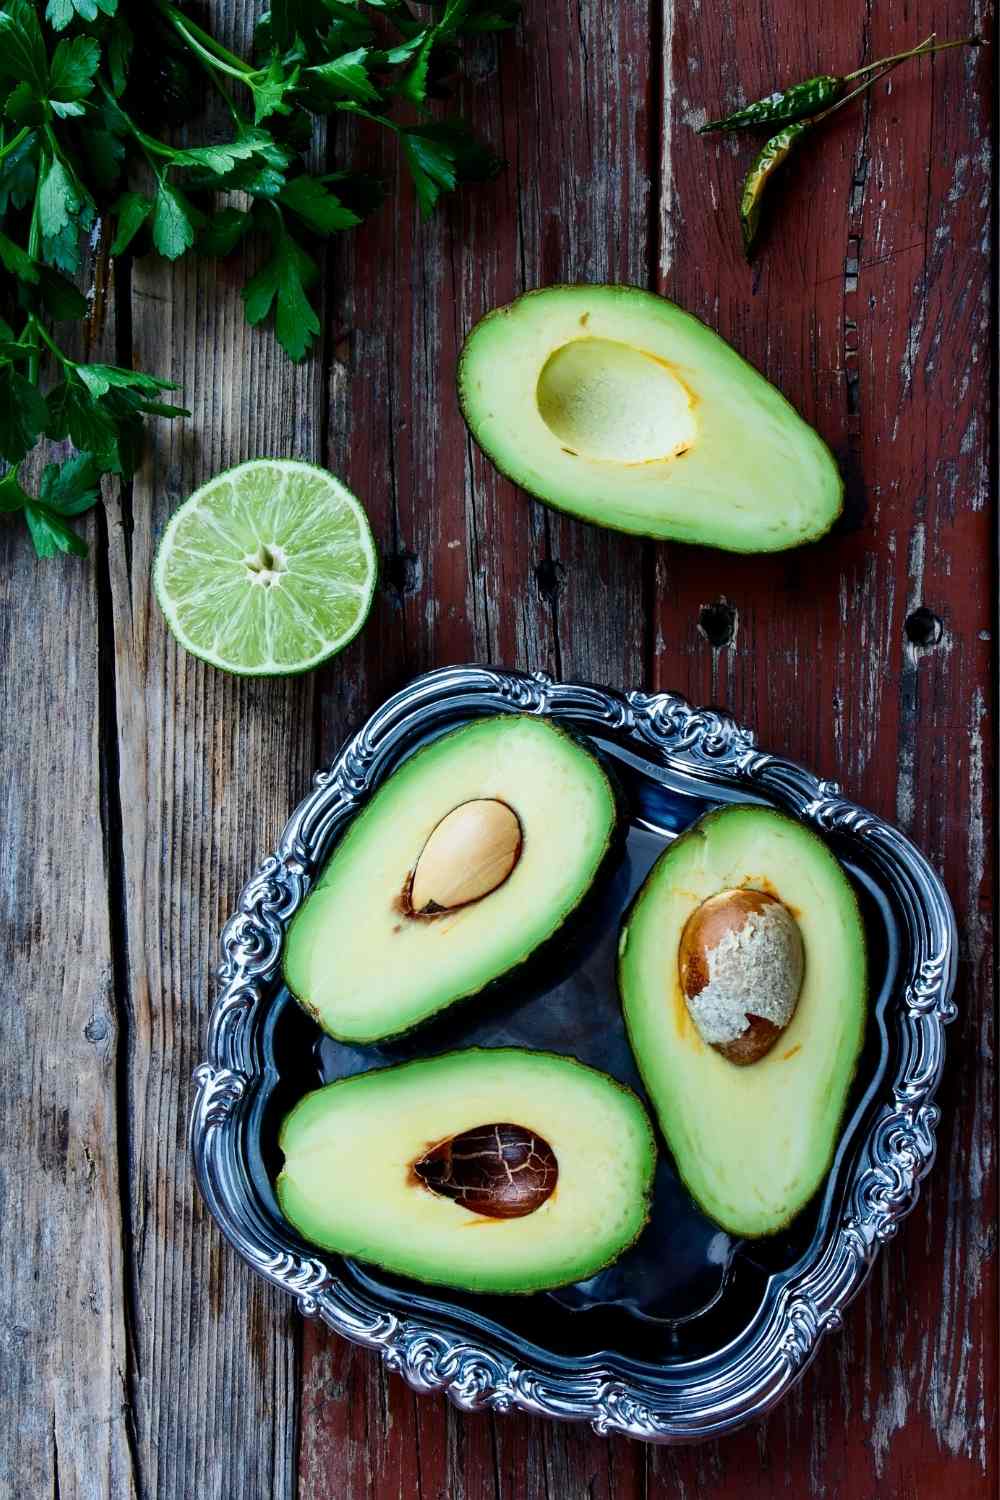 Avocados Can Help Lower Your Diabetes Risk